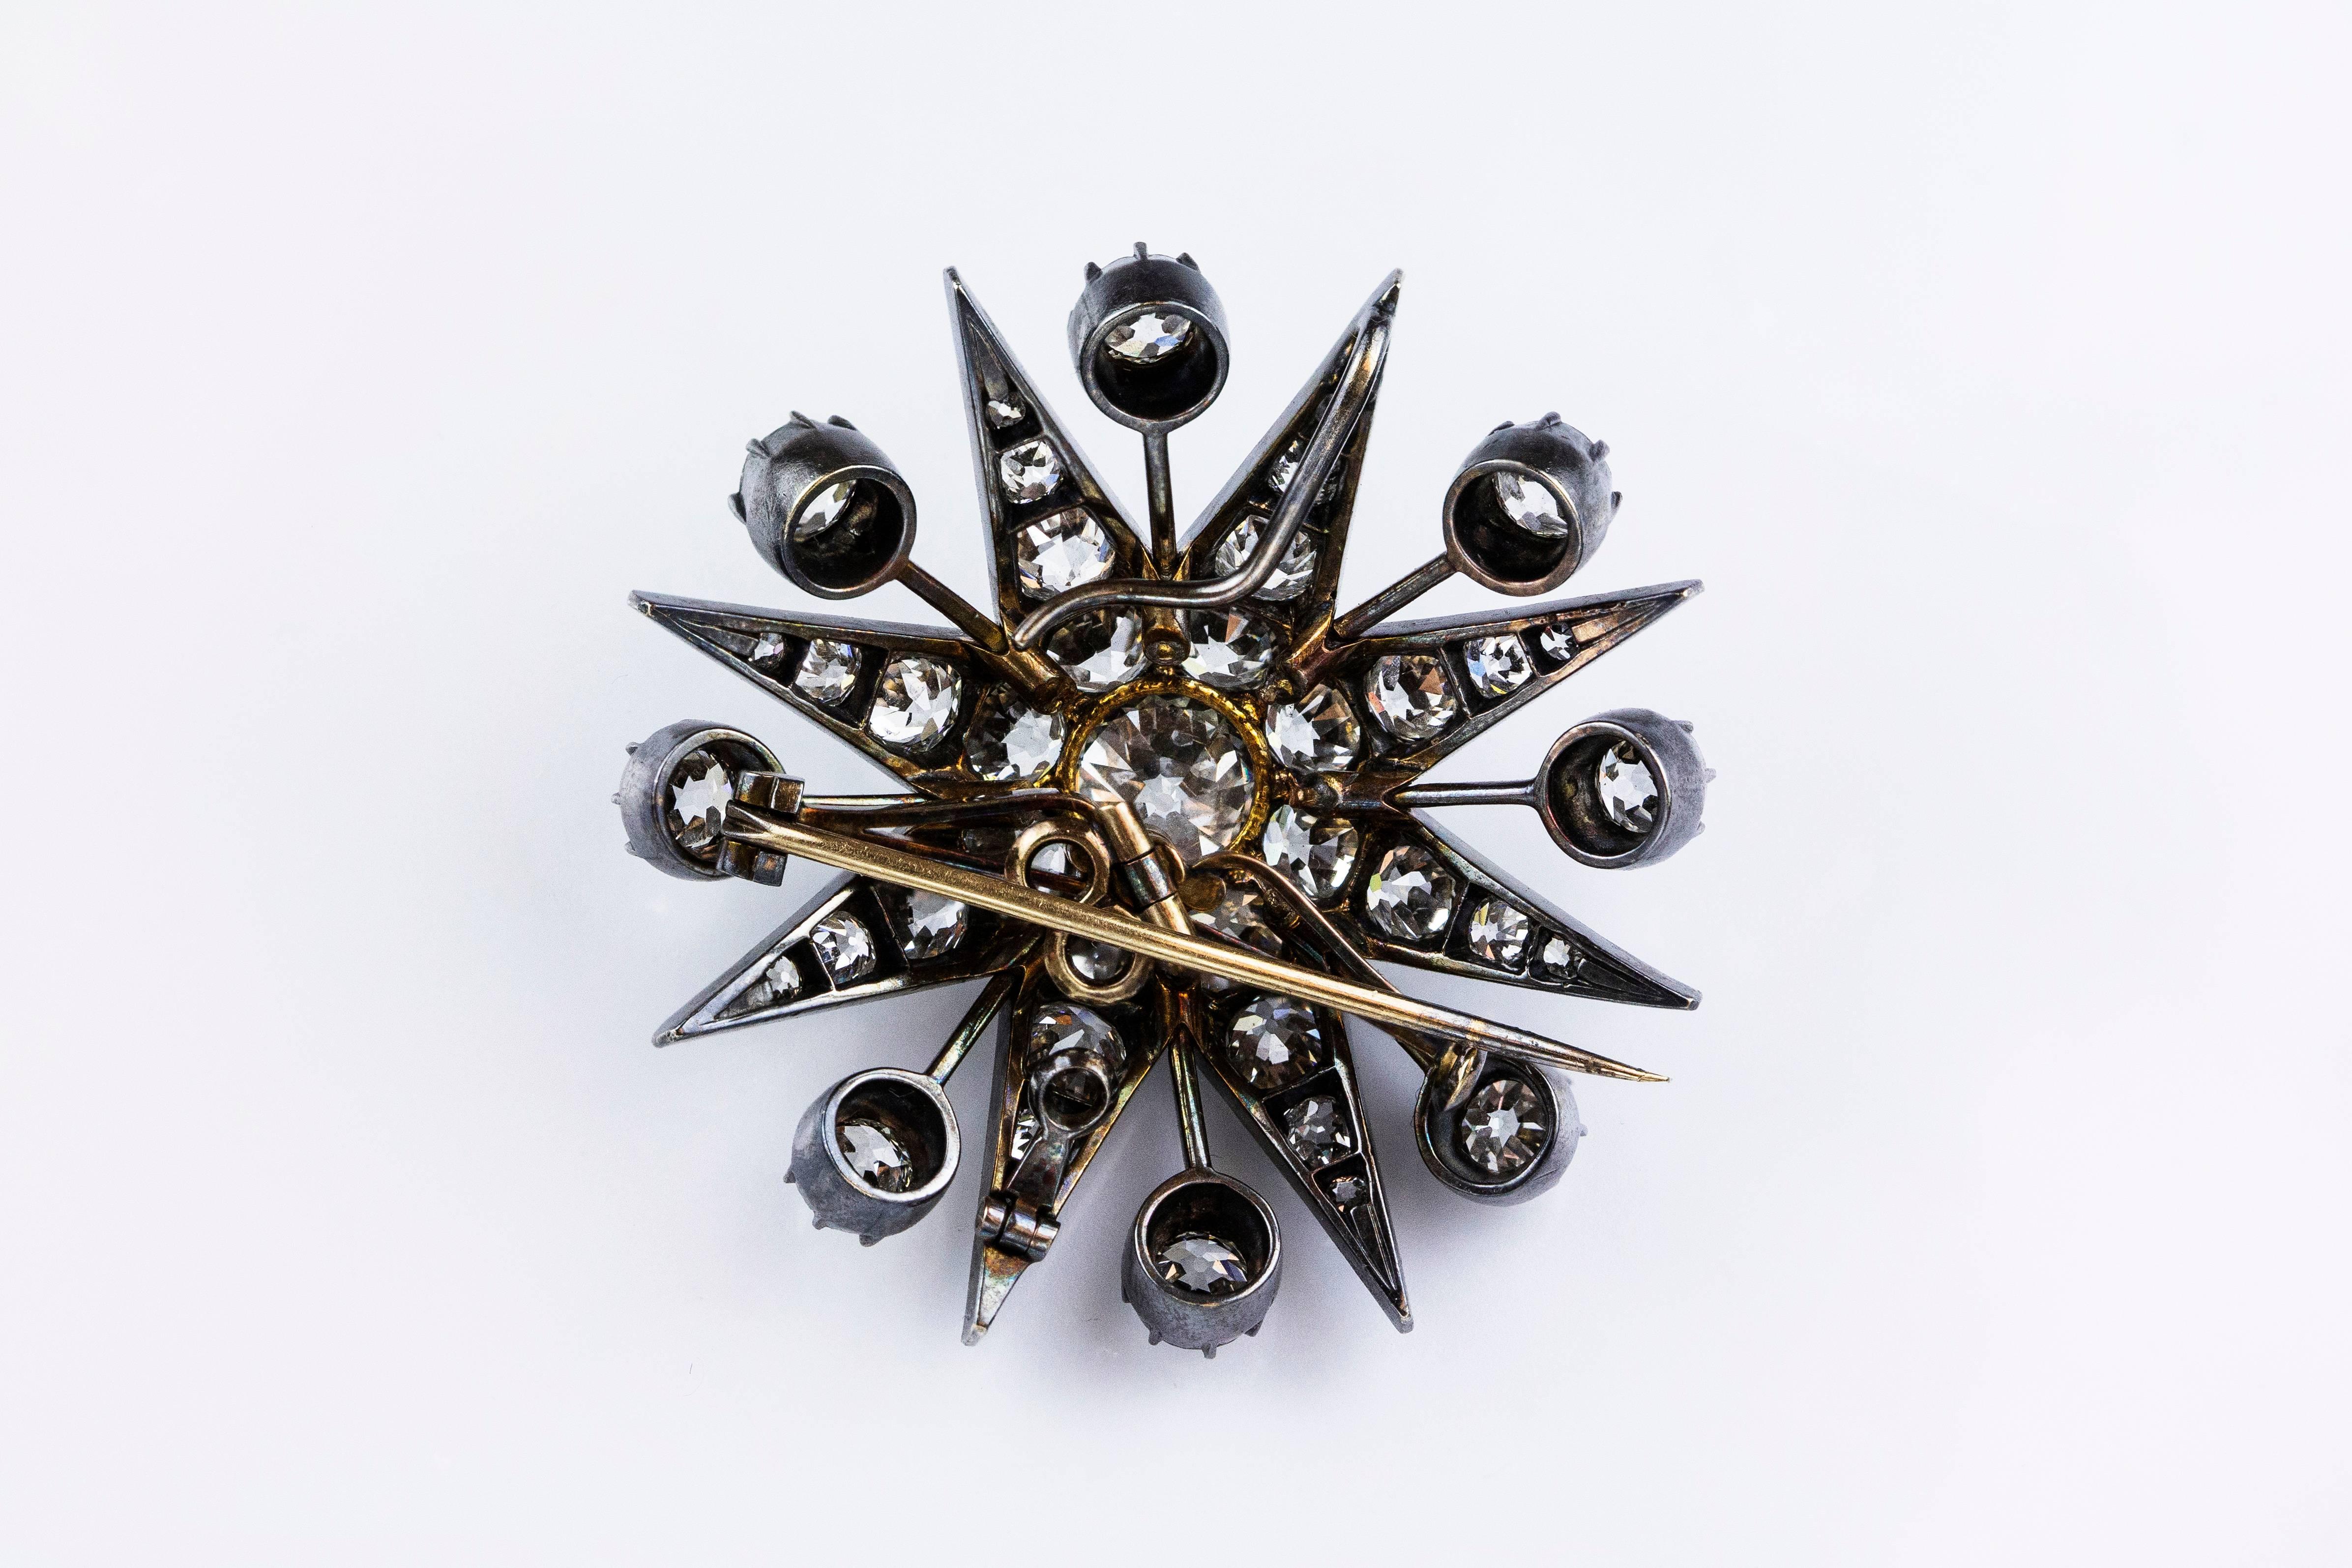 This diamond star brooch set with 49 Old European cut diamonds in a claw setting. The approximate diamond weight is 12.50 carat. Silver topped gold mounting. The brooch features a hook so it could be worn as a pendant. Also it has a special wire on